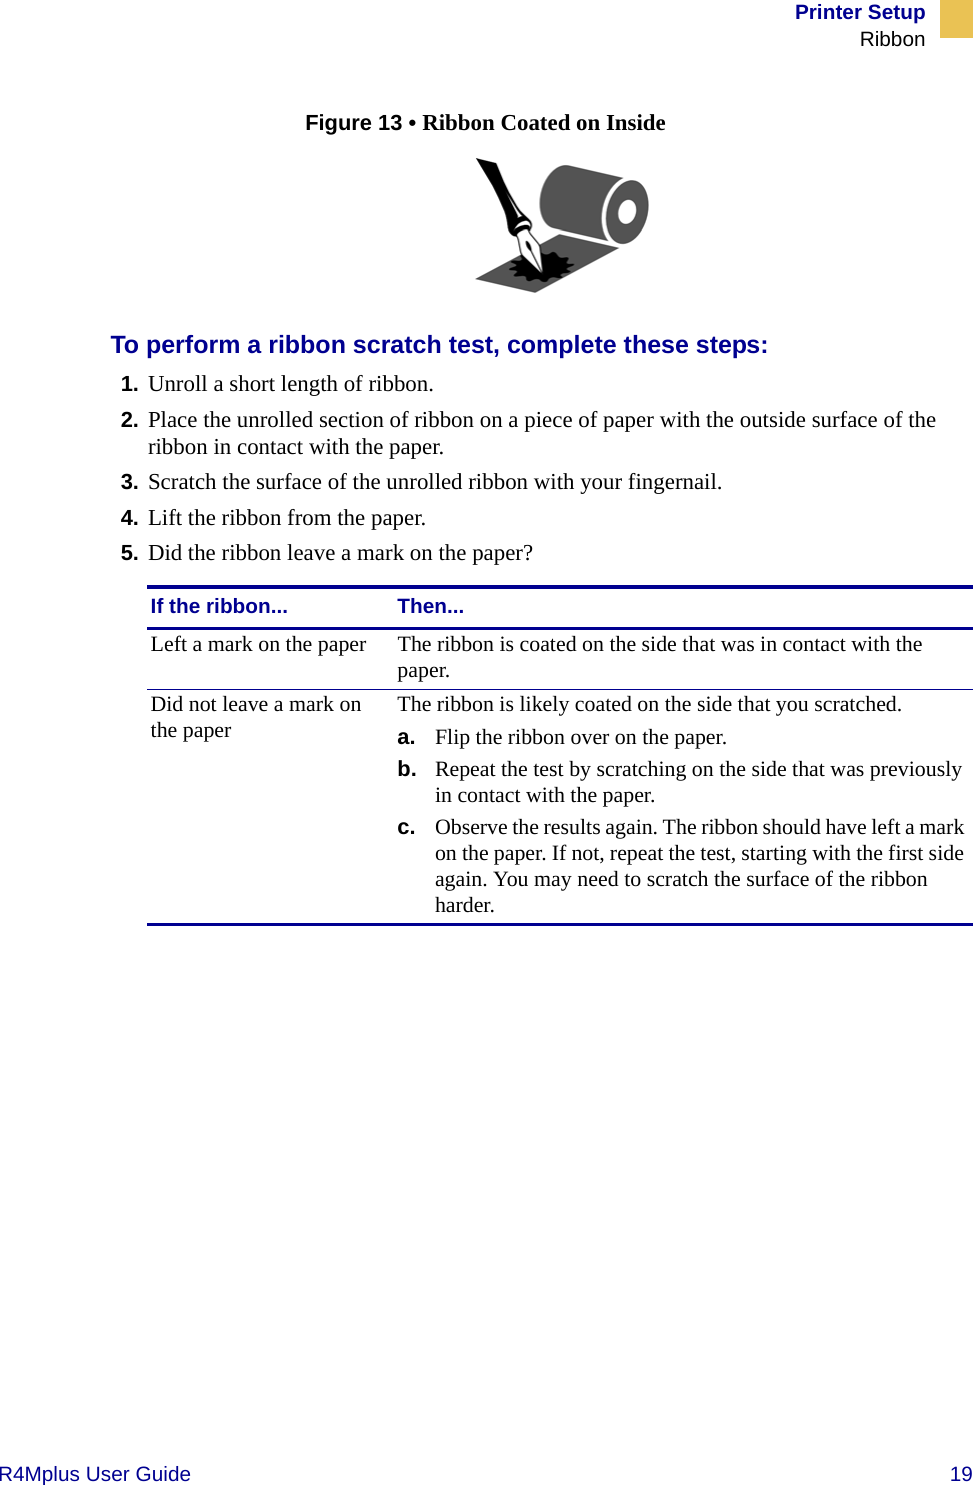 Printer SetupRibbonR4Mplus User Guide  19Figure 13 • Ribbon Coated on InsideTo perform a ribbon scratch test, complete these steps:1. Unroll a short length of ribbon.2. Place the unrolled section of ribbon on a piece of paper with the outside surface of the ribbon in contact with the paper.3. Scratch the surface of the unrolled ribbon with your fingernail.4. Lift the ribbon from the paper.5. Did the ribbon leave a mark on the paper?If the ribbon... Then...Left a mark on the paper The ribbon is coated on the side that was in contact with the paper.Did not leave a mark on the paper The ribbon is likely coated on the side that you scratched. a. Flip the ribbon over on the paper.b. Repeat the test by scratching on the side that was previously in contact with the paper.c. Observe the results again. The ribbon should have left a mark on the paper. If not, repeat the test, starting with the first side again. You may need to scratch the surface of the ribbon harder.